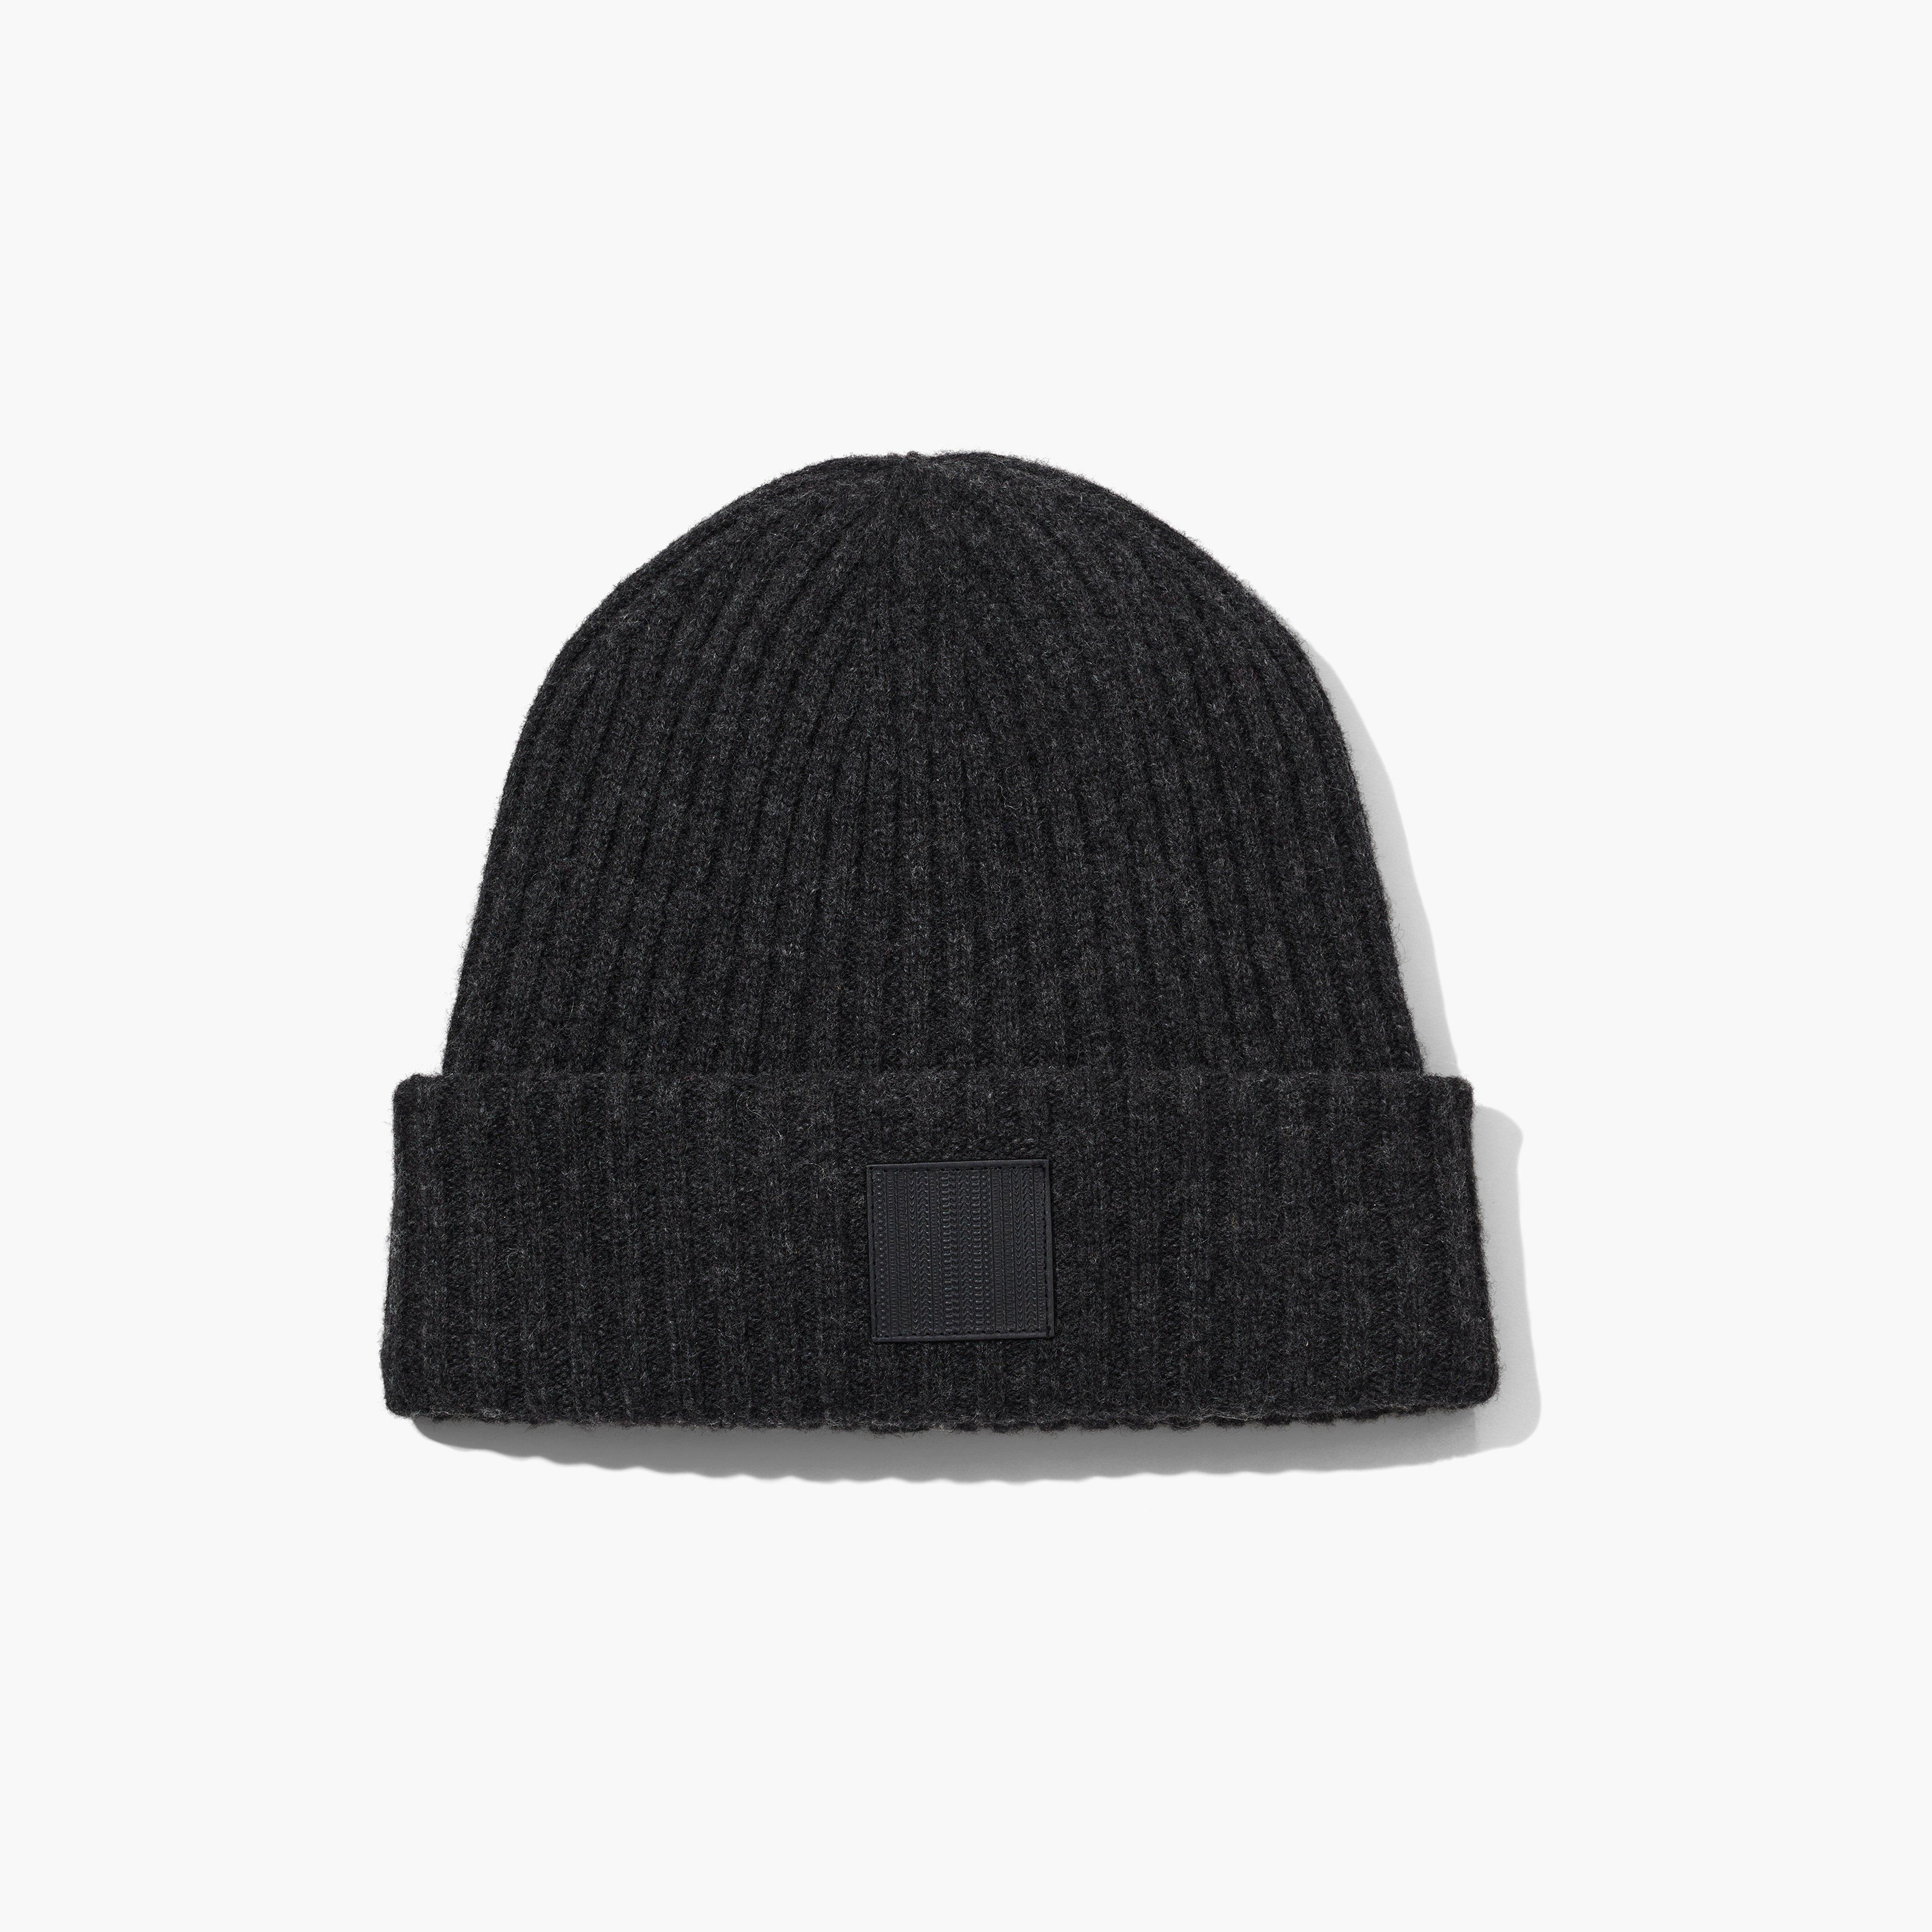 Marc by Marc jacobs The Ribbed Beanie,CHARCOAL